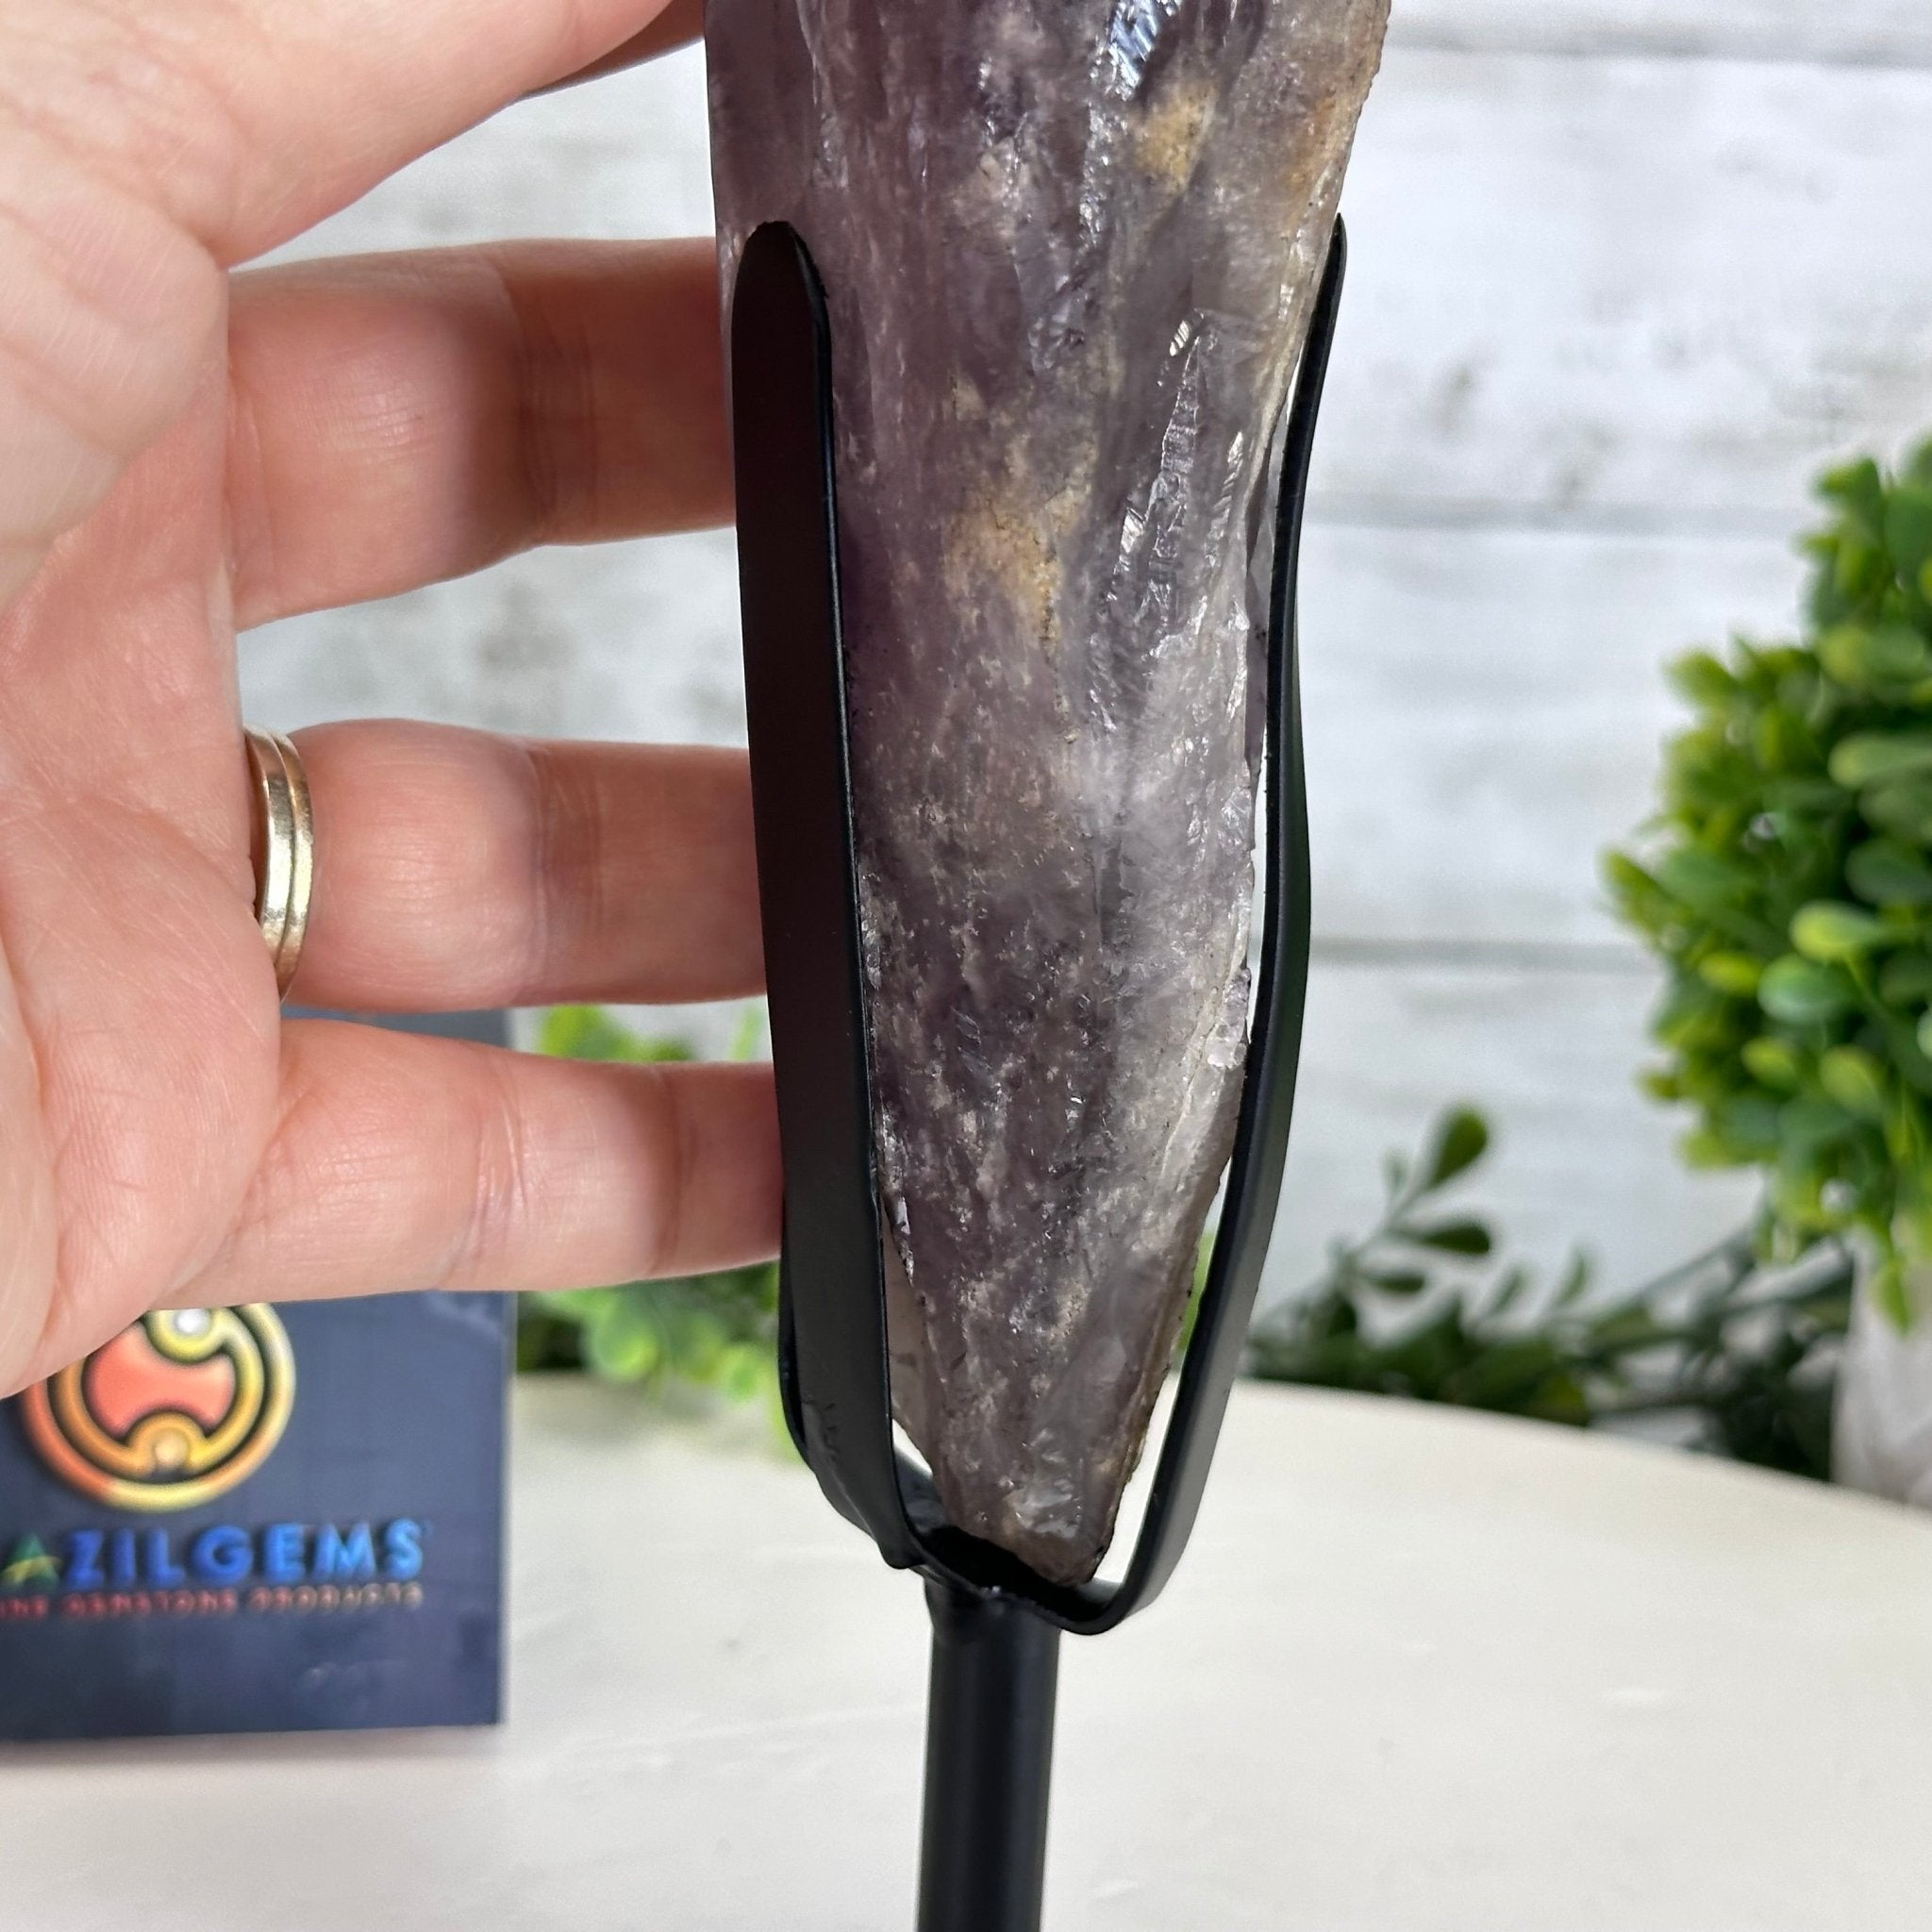 Super Quality Amethyst Wand on a Metal Stand, 1.9 lbs & 10.4" Tall #3123AM-007 - Brazil GemsBrazil GemsSuper Quality Amethyst Wand on a Metal Stand, 1.9 lbs & 10.4" Tall #3123AM-007Clusters on Fixed Bases3123AM-007